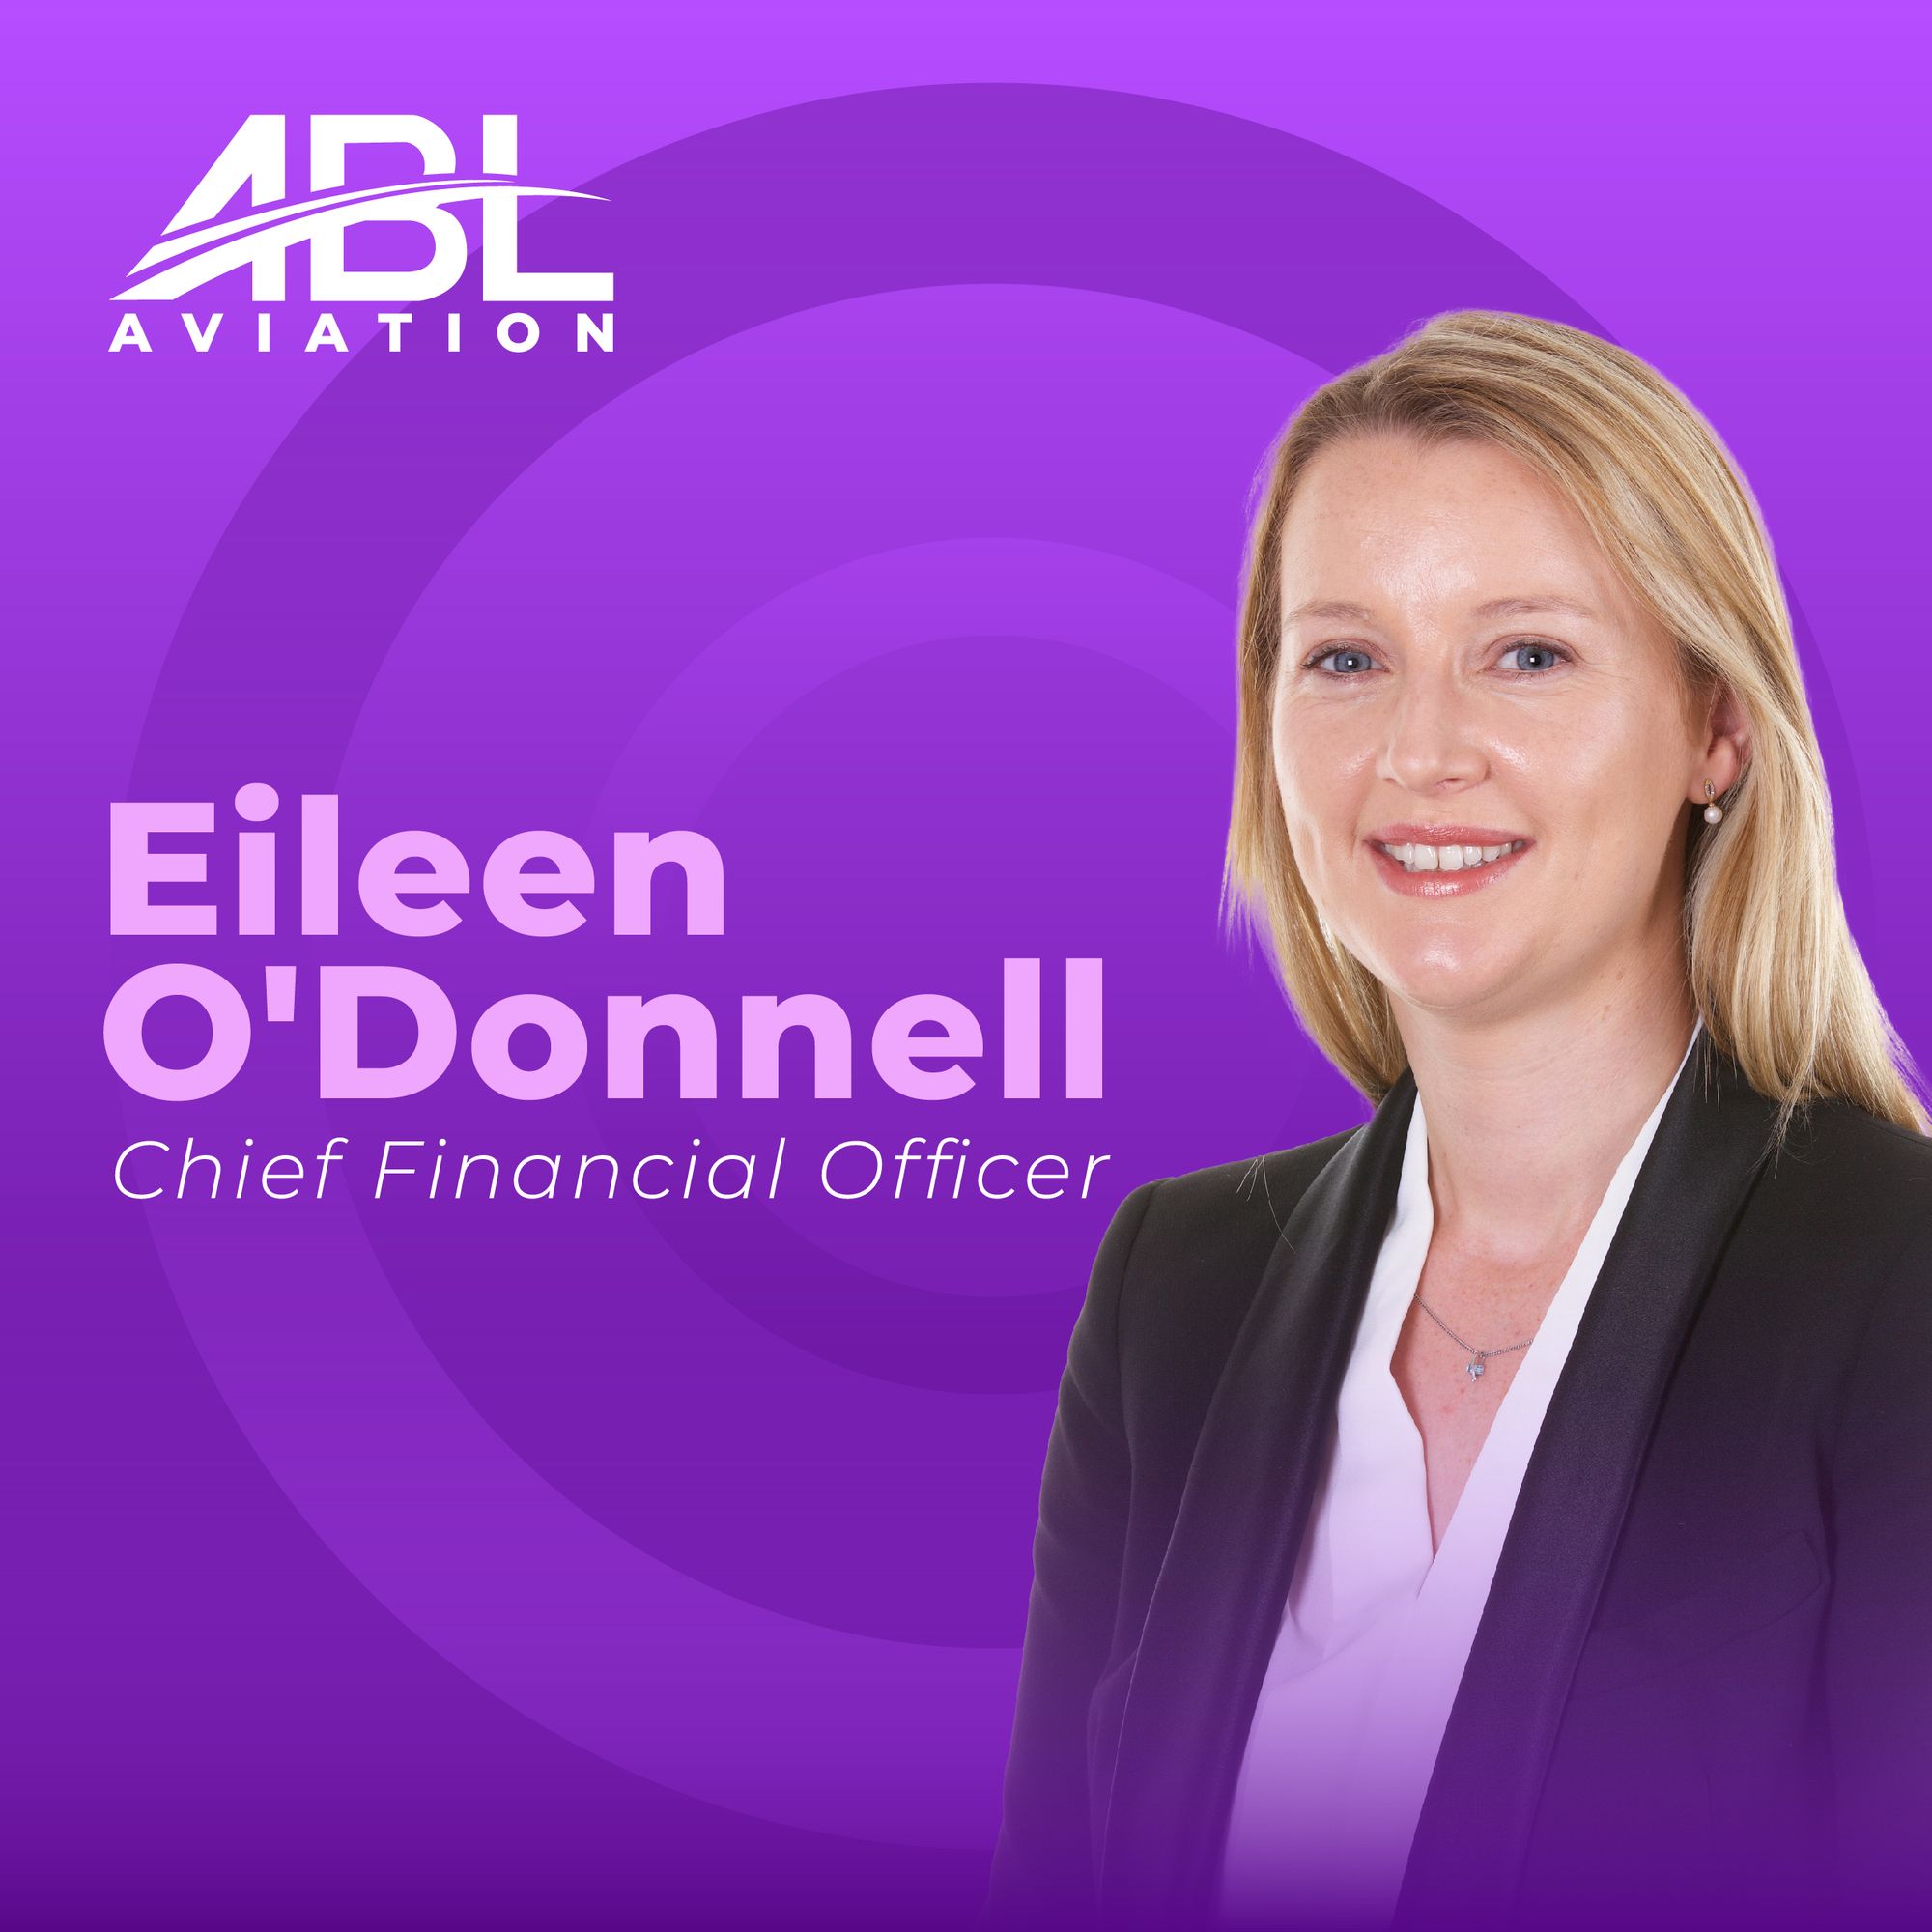 ABL Aviation Promotes Eileen O’Donnell To Chief Financial Officer